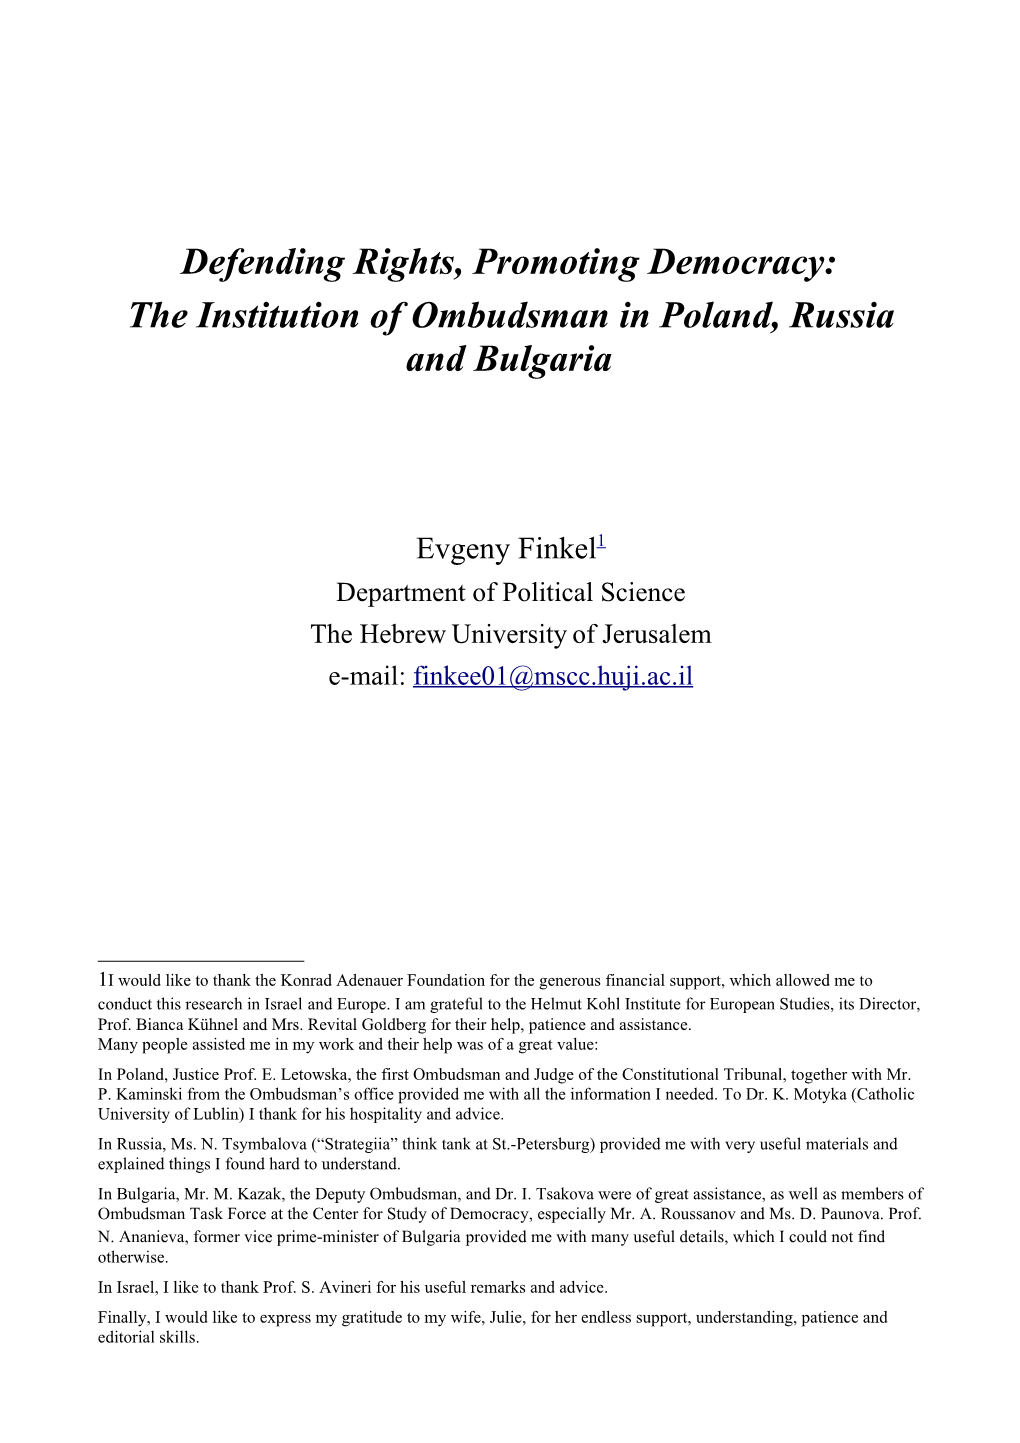 Defending Rights, Promoting Democracy: the Institution of Ombudsman in Poland, Russia and Bulgaria